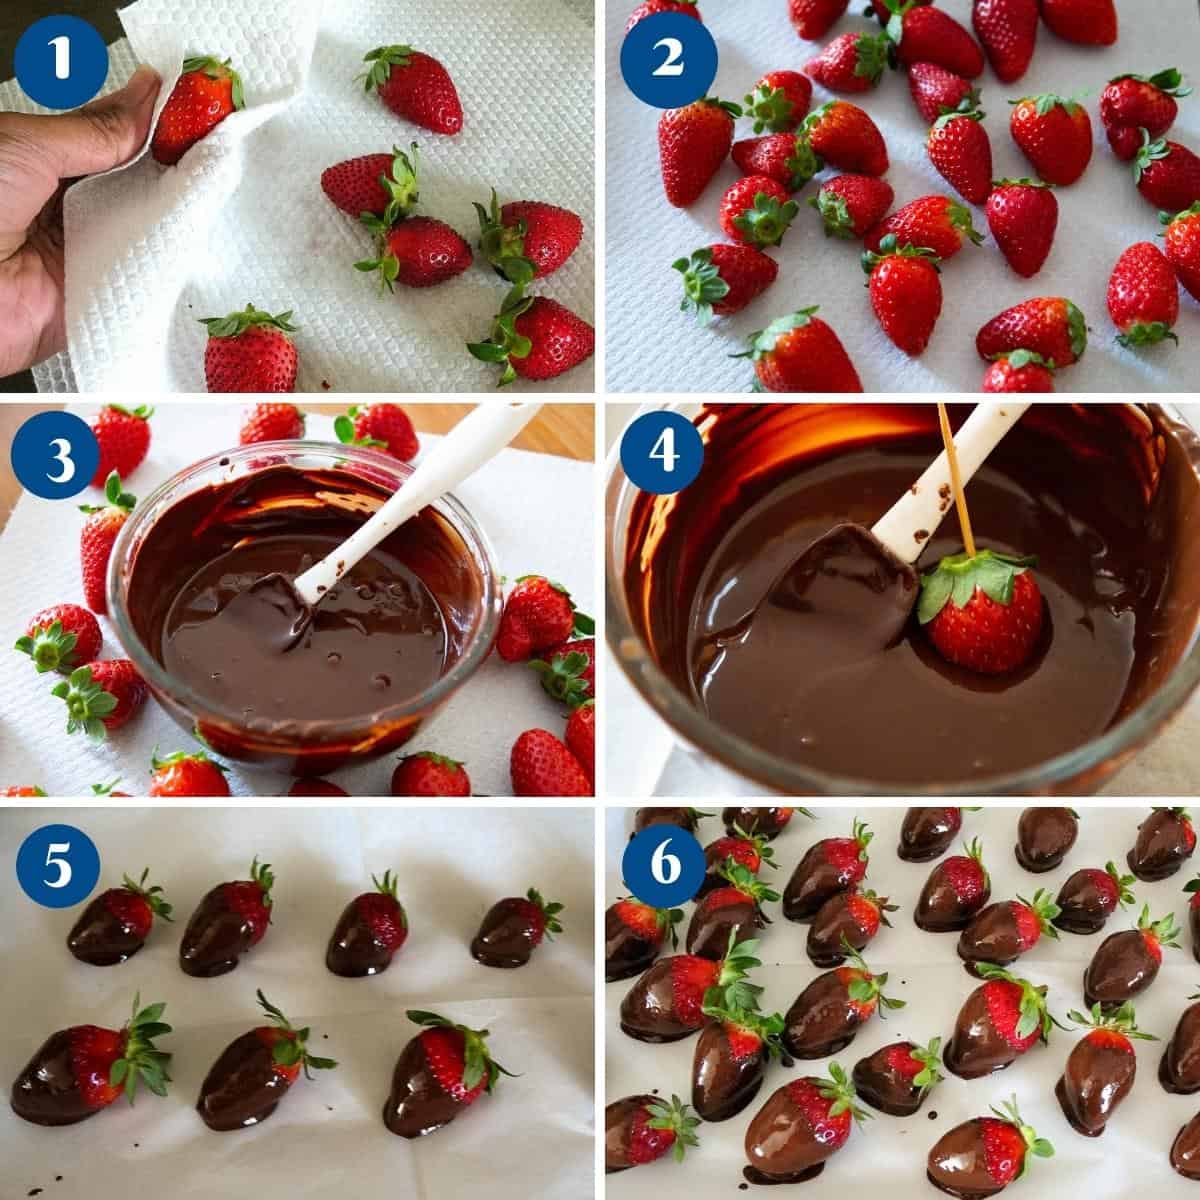 Progress pictures making the chocolate covered strawberries.